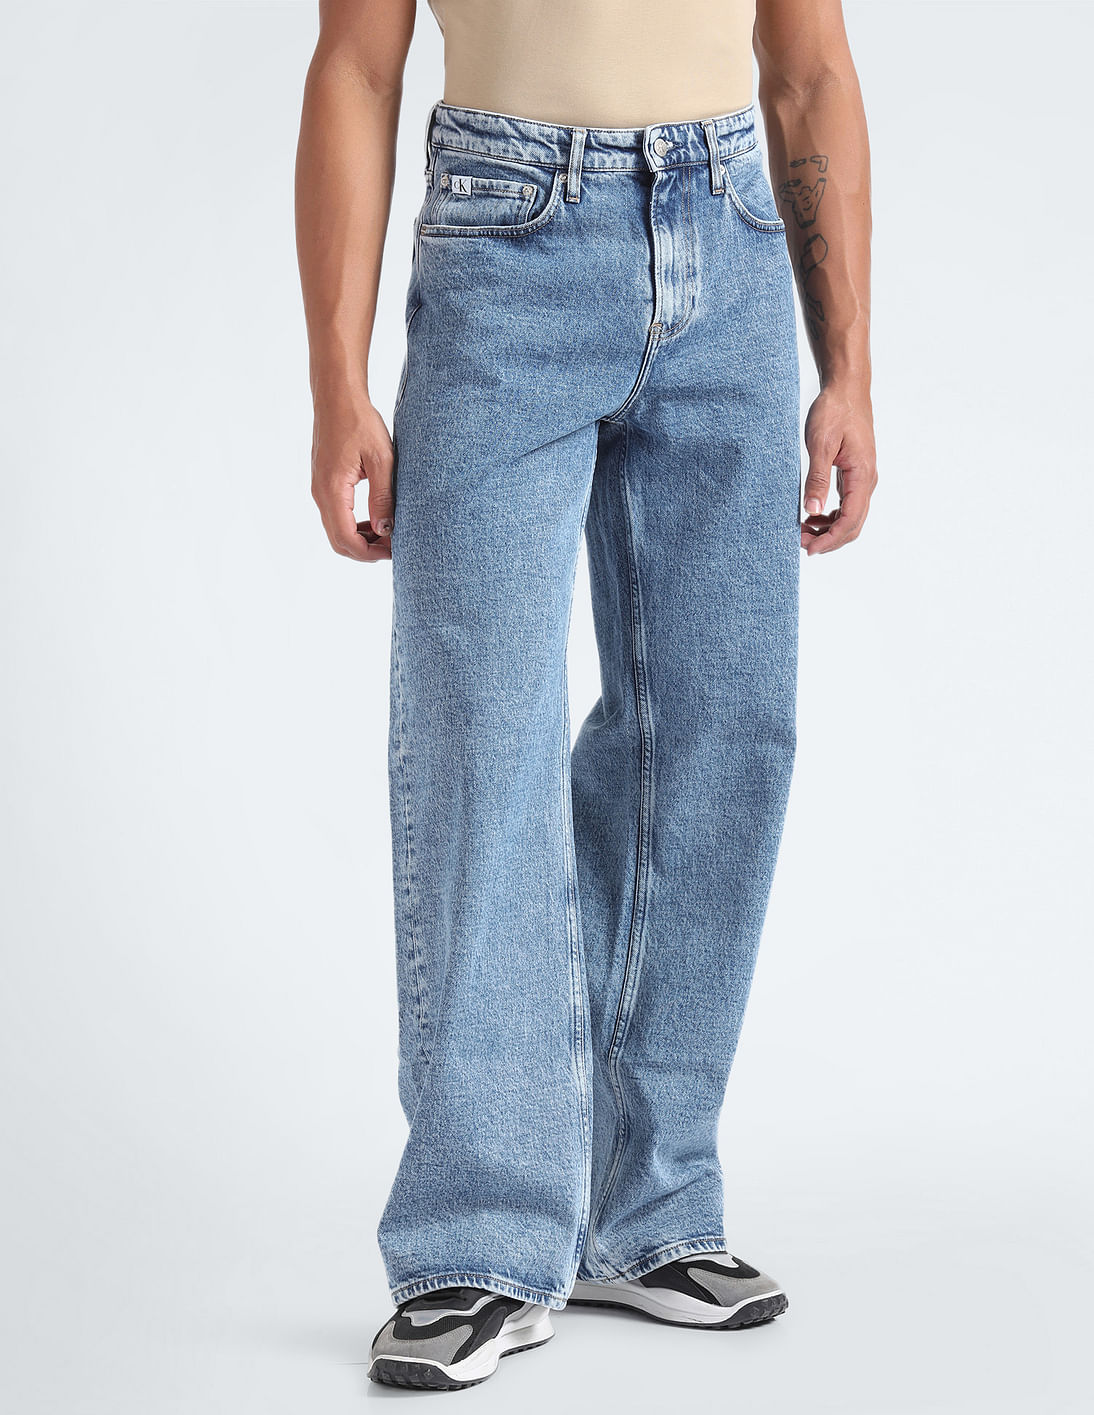 Buy Calvin Klein Jeans Mid Rise 90's Loose Fit Jeans - NNNOW.com